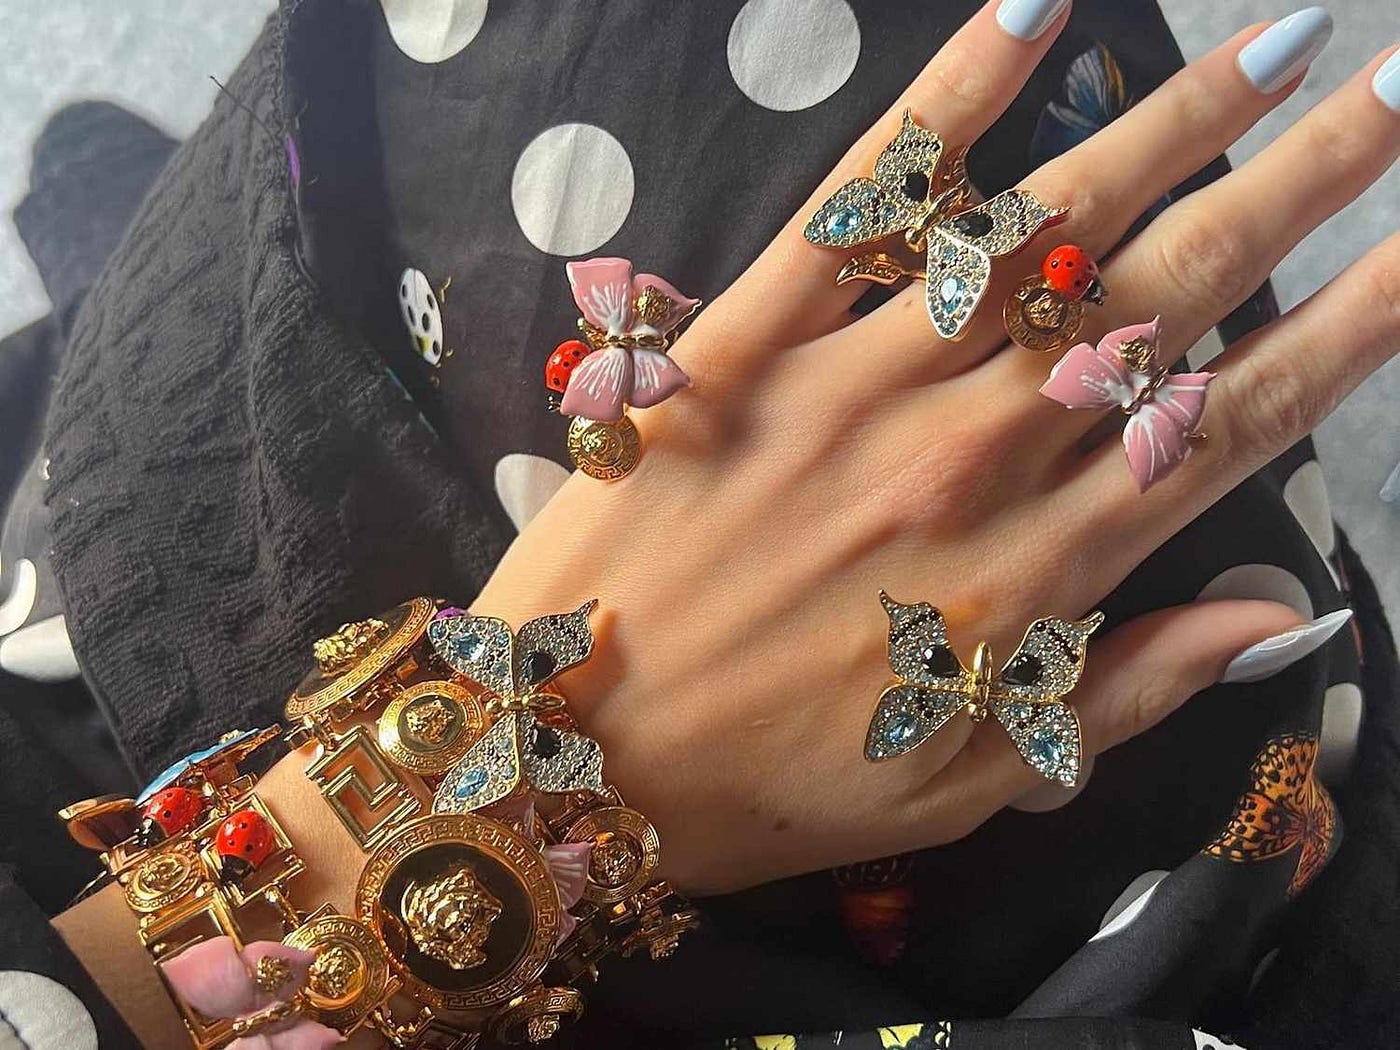 Dazzling in Style: What are the Jewelry Trends for 2023?